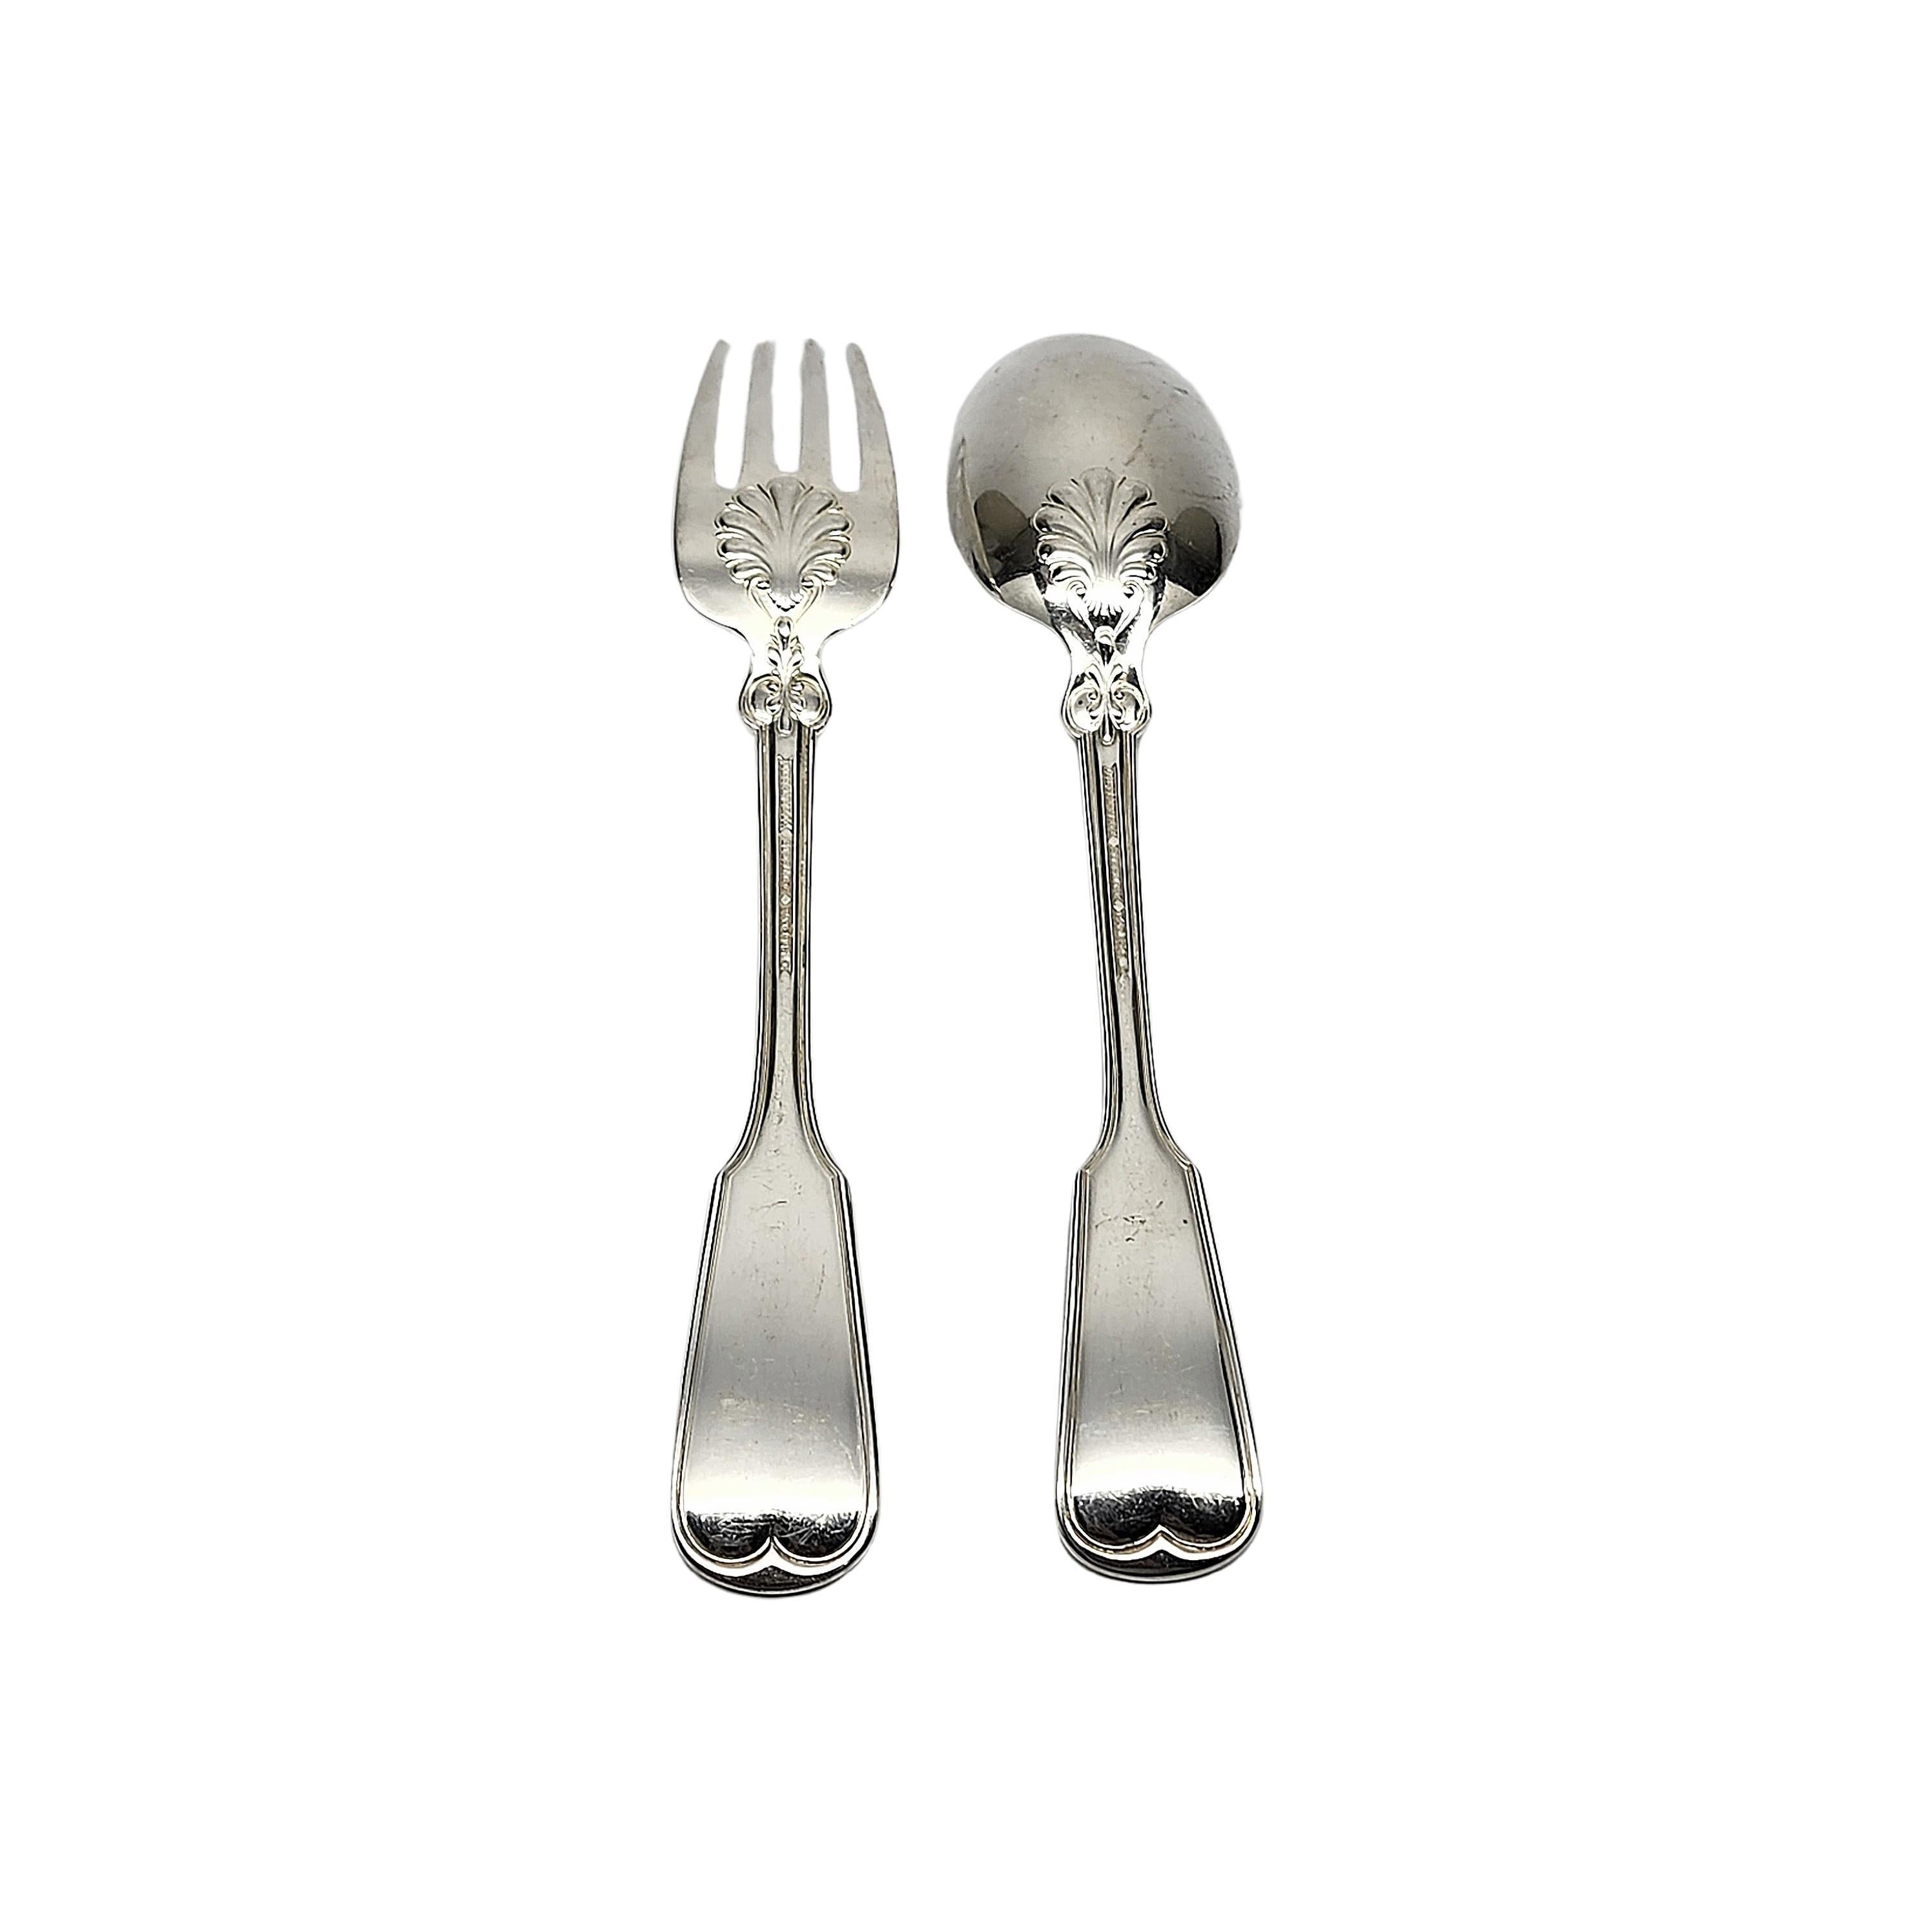 2 piece serving set including a sterling silver serving spoon and fork in the Shell & Thread pattern by Tiffany & Co with monogram.

Monogram appears to be C

The Shell & Thread pattern was introduced in 1905 and continues to be one of the most